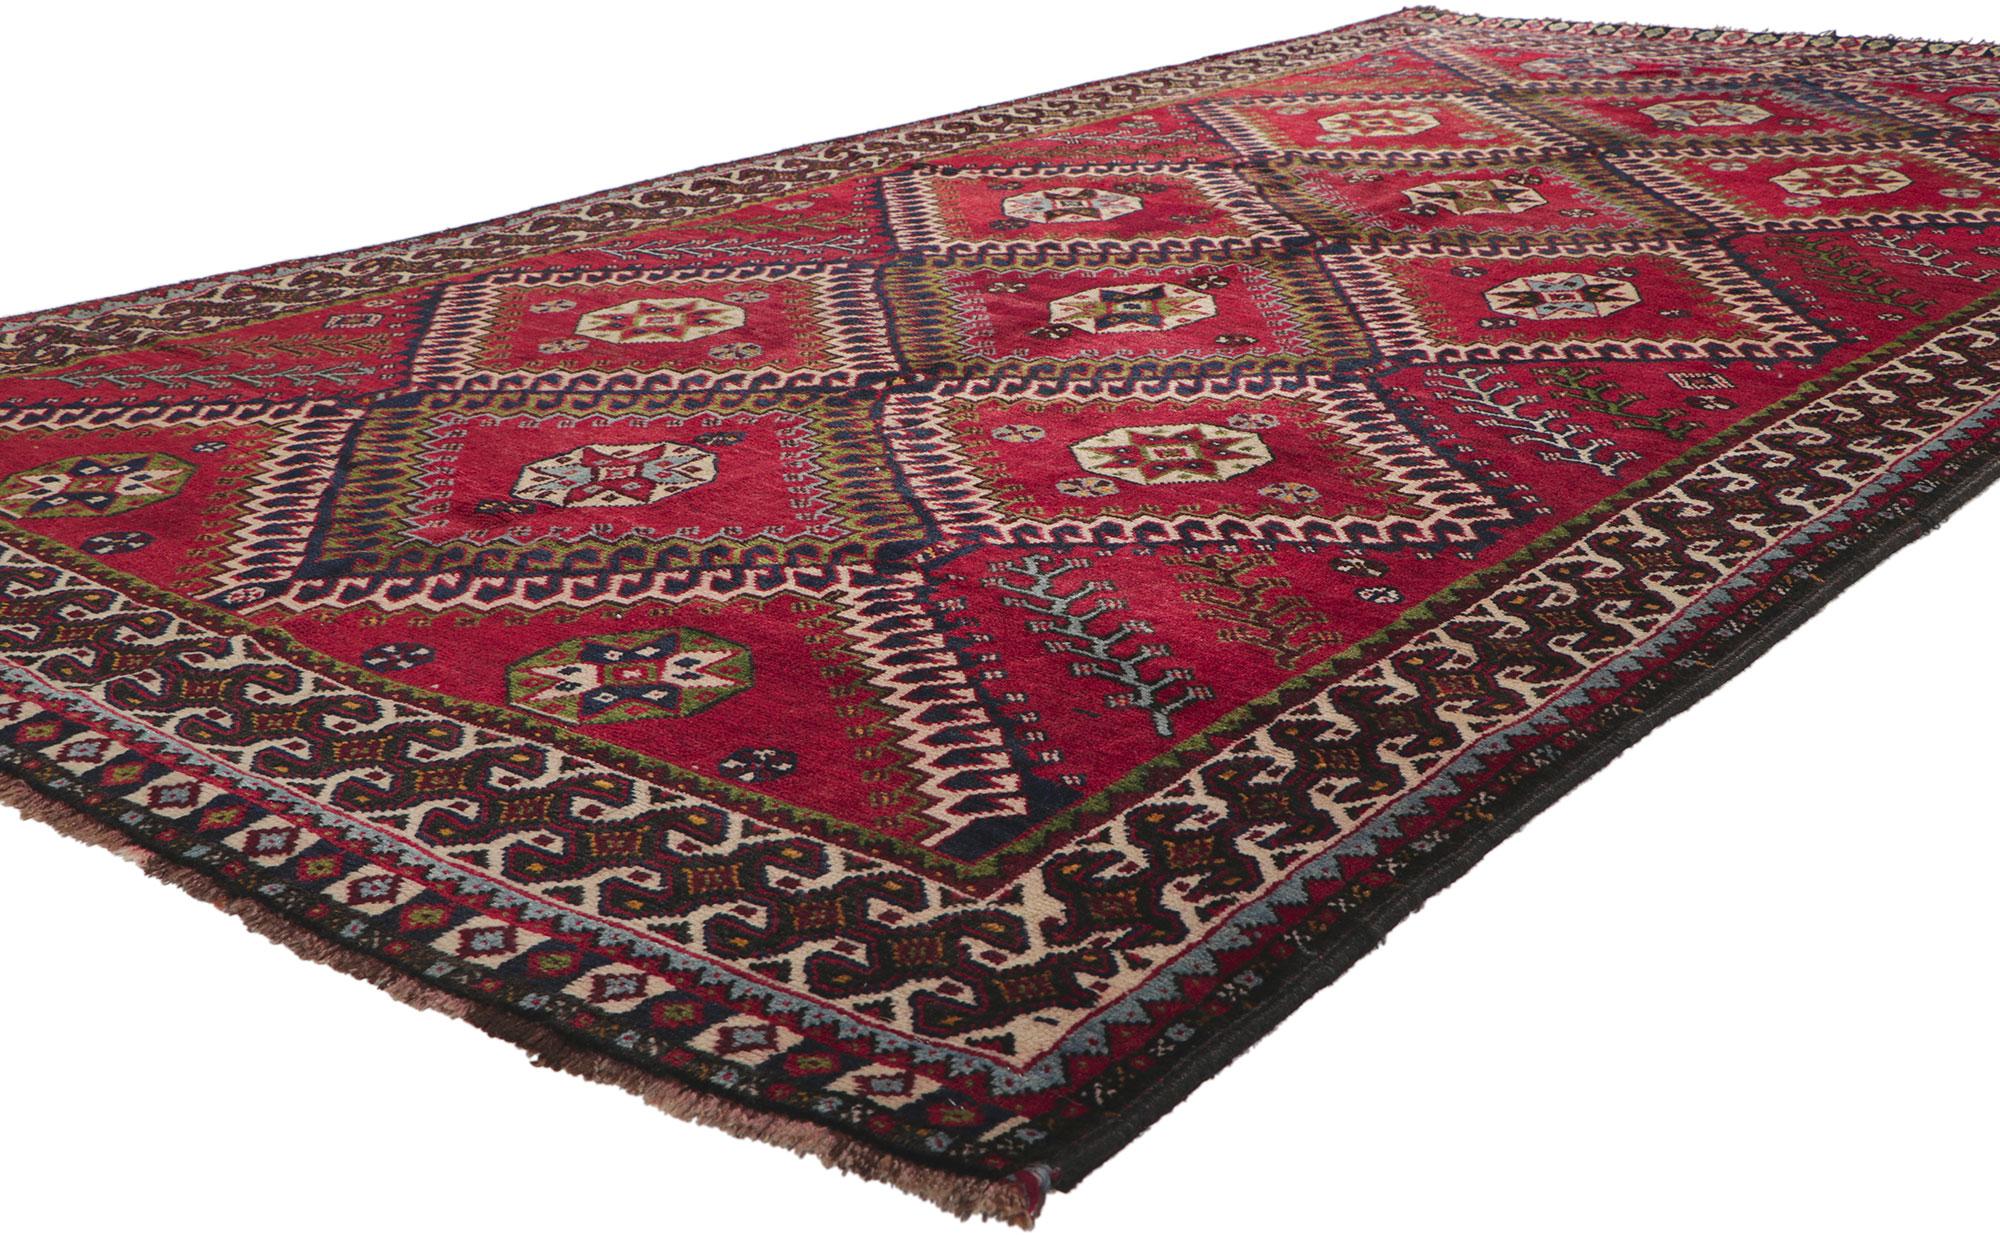 61081 Vintage Persian Shiraz Rug, 05'06 x 10'01.
Embark on a ruggedly enchanting saga woven within the threads of this hand-knotted wool vintage Persian Shiraz rug. Picture the nomadic artisan, skillfully infusing tribal mystique into each intricate